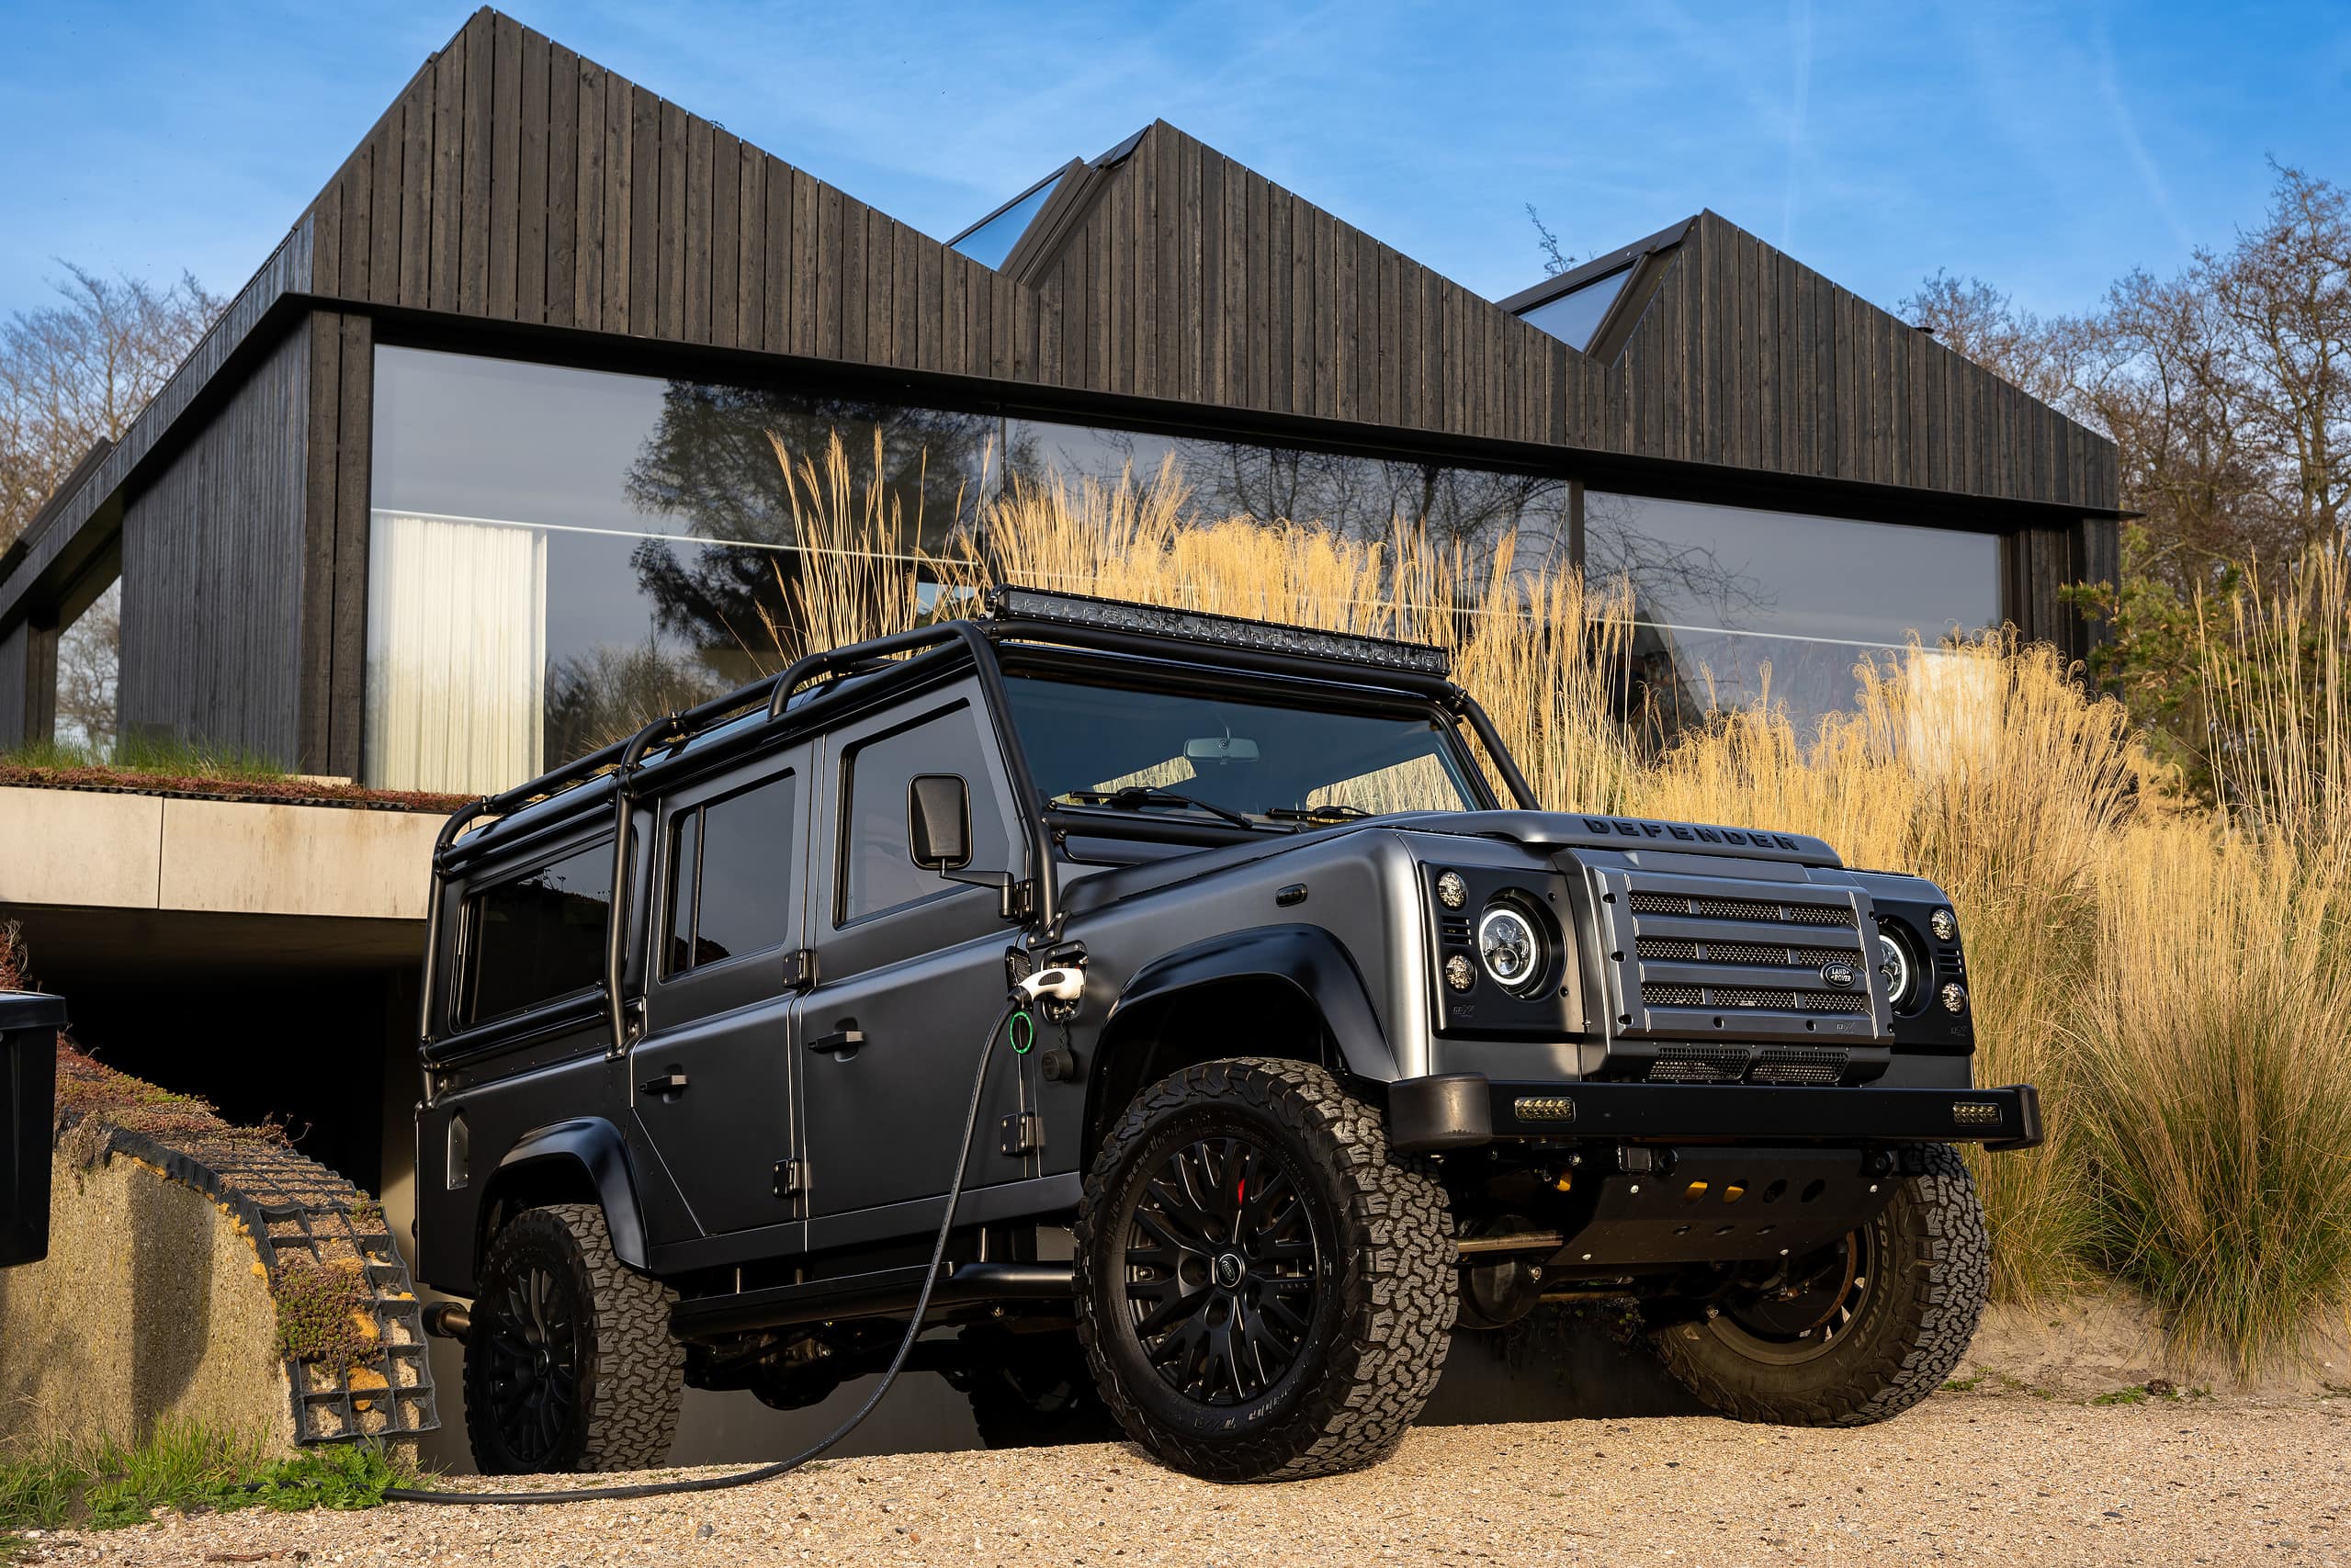 Electric Land Rover Defender – The Landrovers